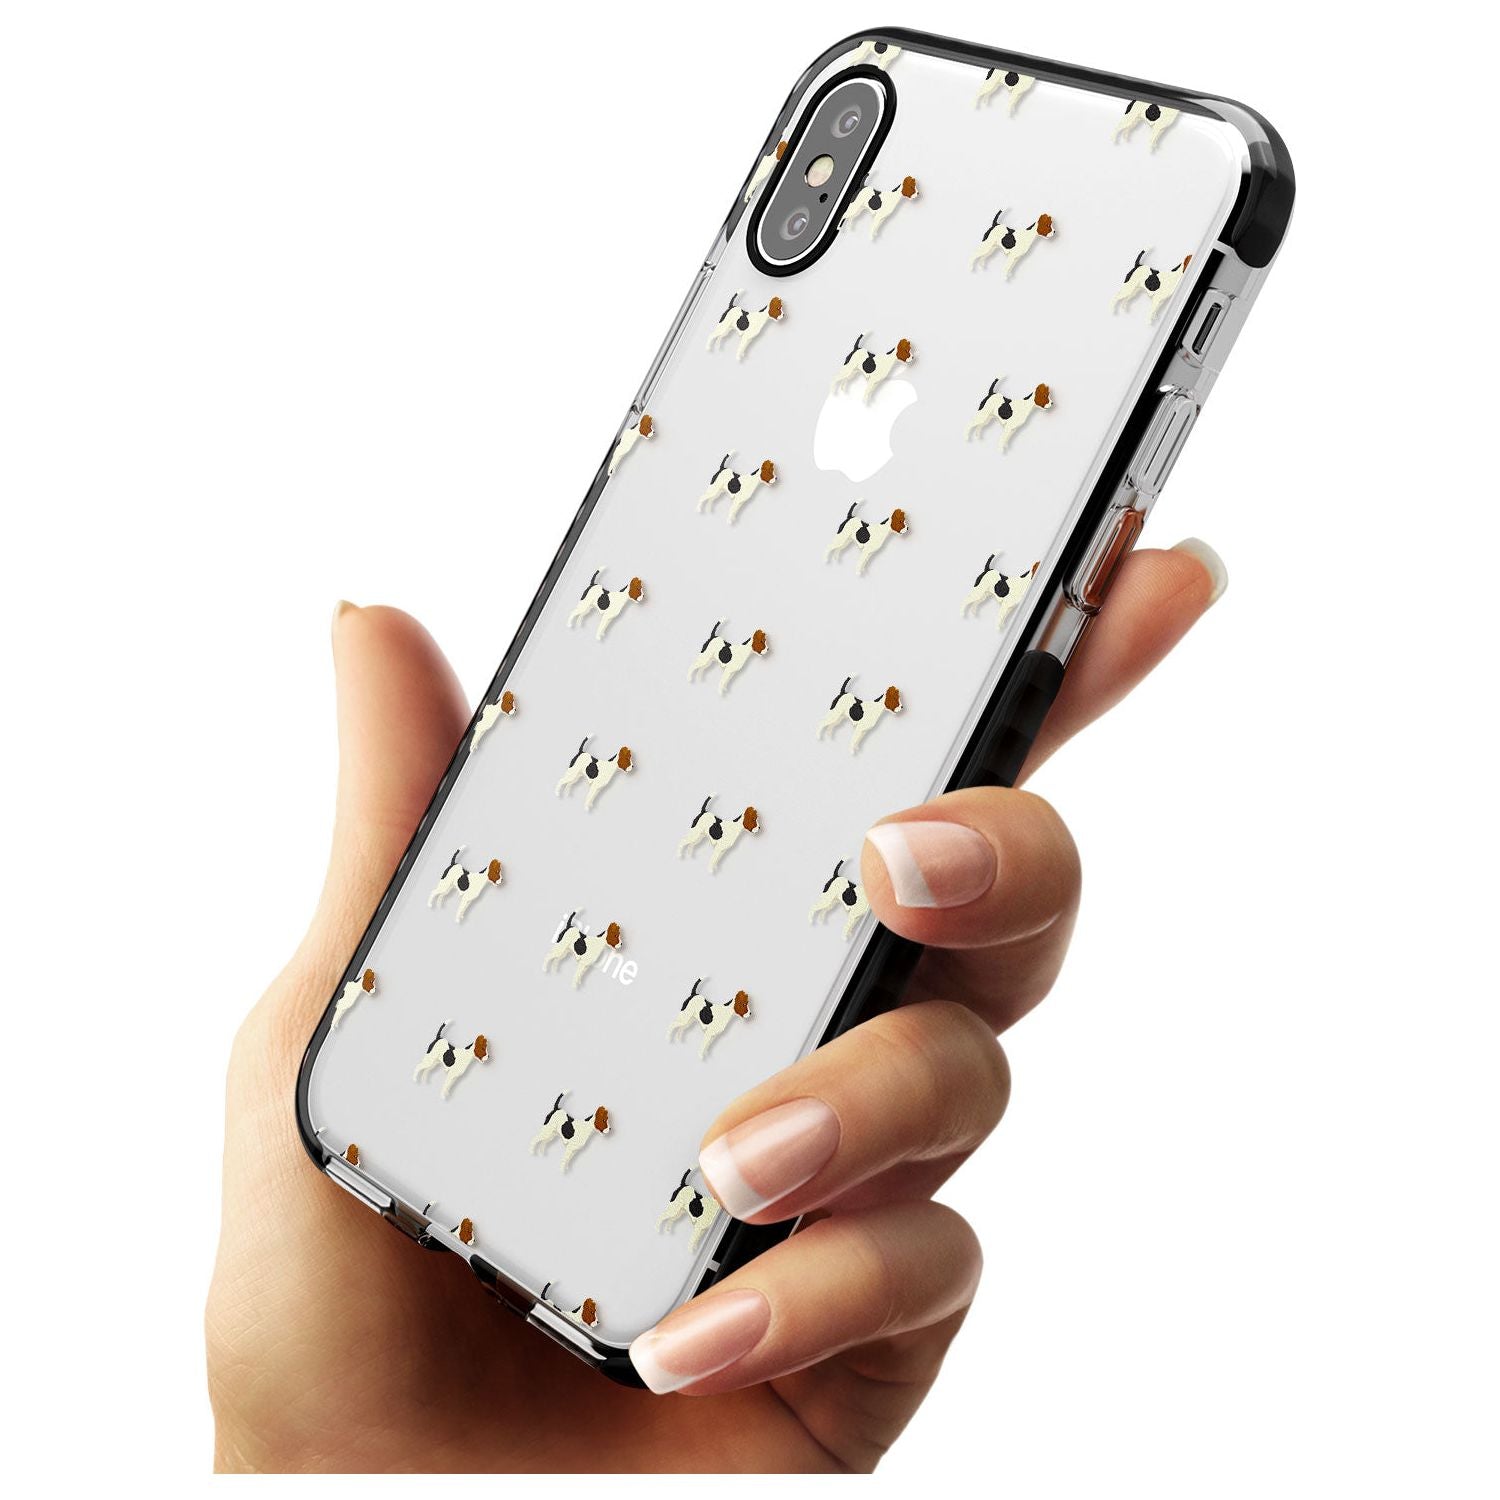 Jack Russell Terrier Dog Pattern Clear Black Impact Phone Case for iPhone X XS Max XR